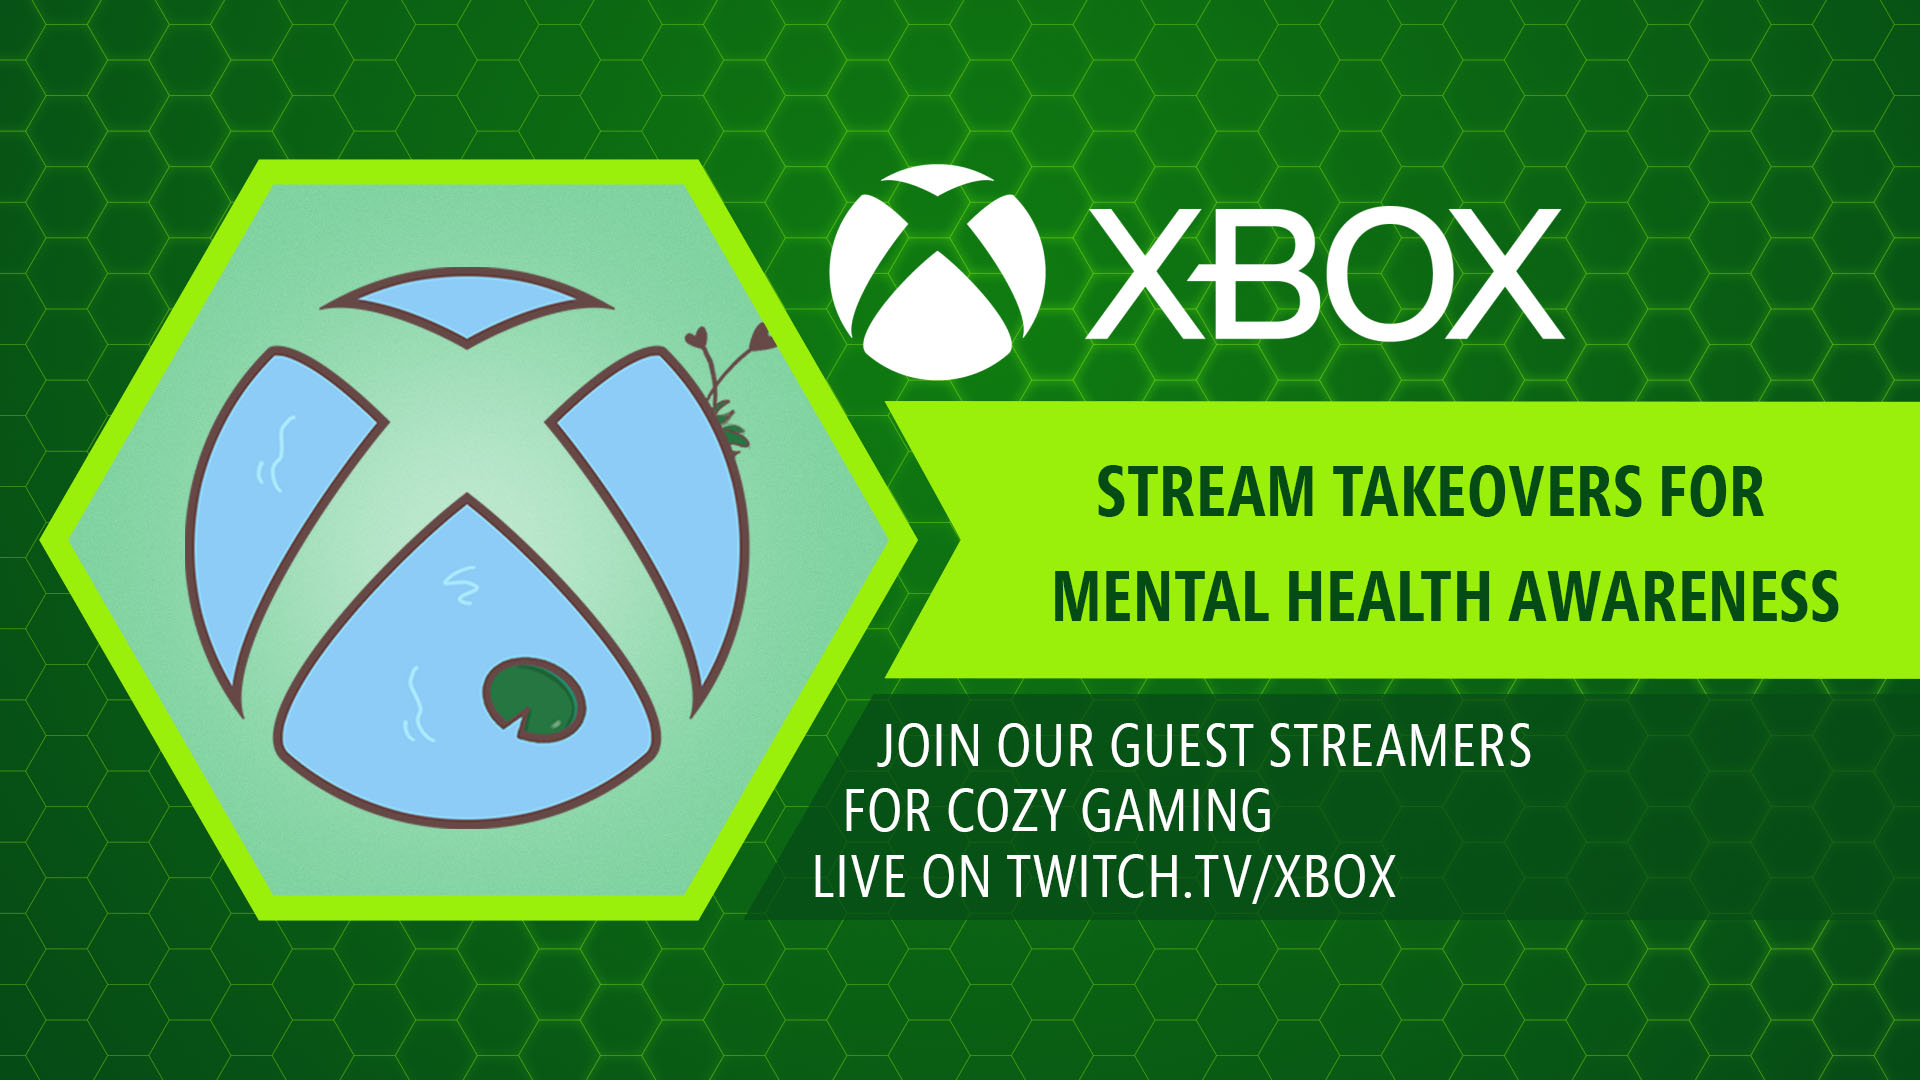 Xbox mental wellness sphere featuring a blue pond and dark green lily pad on a dark green background with a hexagon pattern and the text “Xbox streamer takovers for mental health awareness. Join our guest streamers for cozy gaming on twitch.tv/xbox